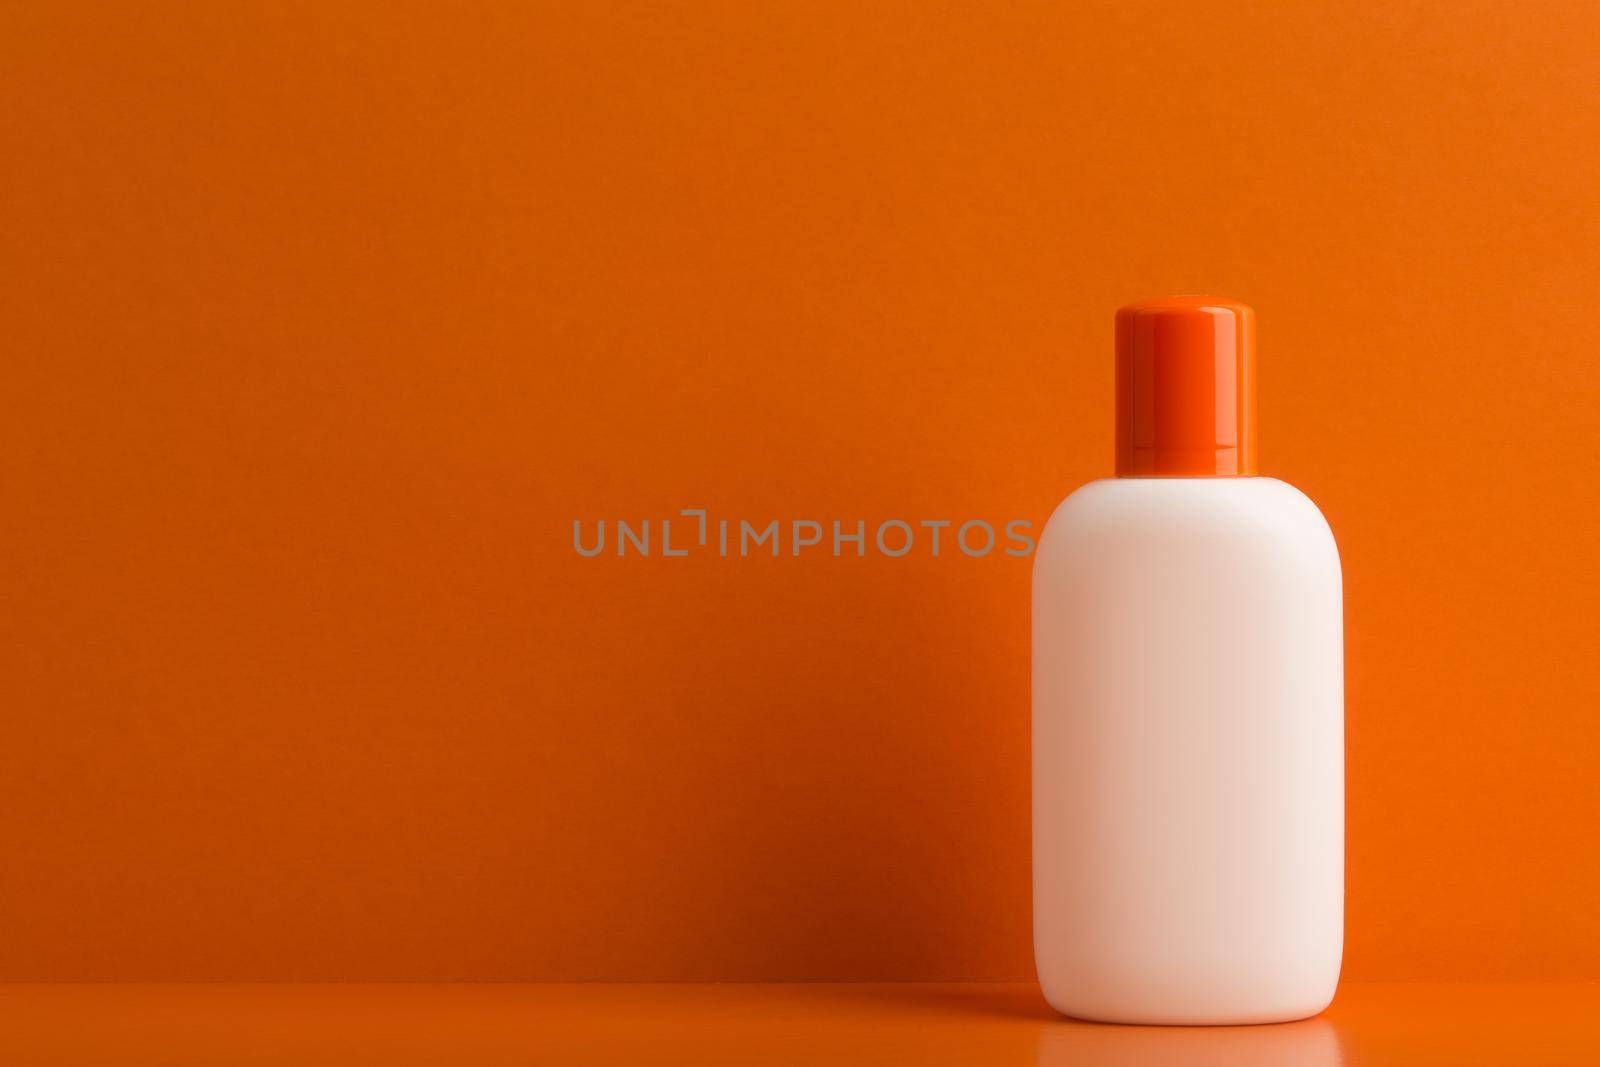 Sunscreen cream or lotion with orange cap on orange background with copy space. Concept of sunscreen products by Senorina_Irina